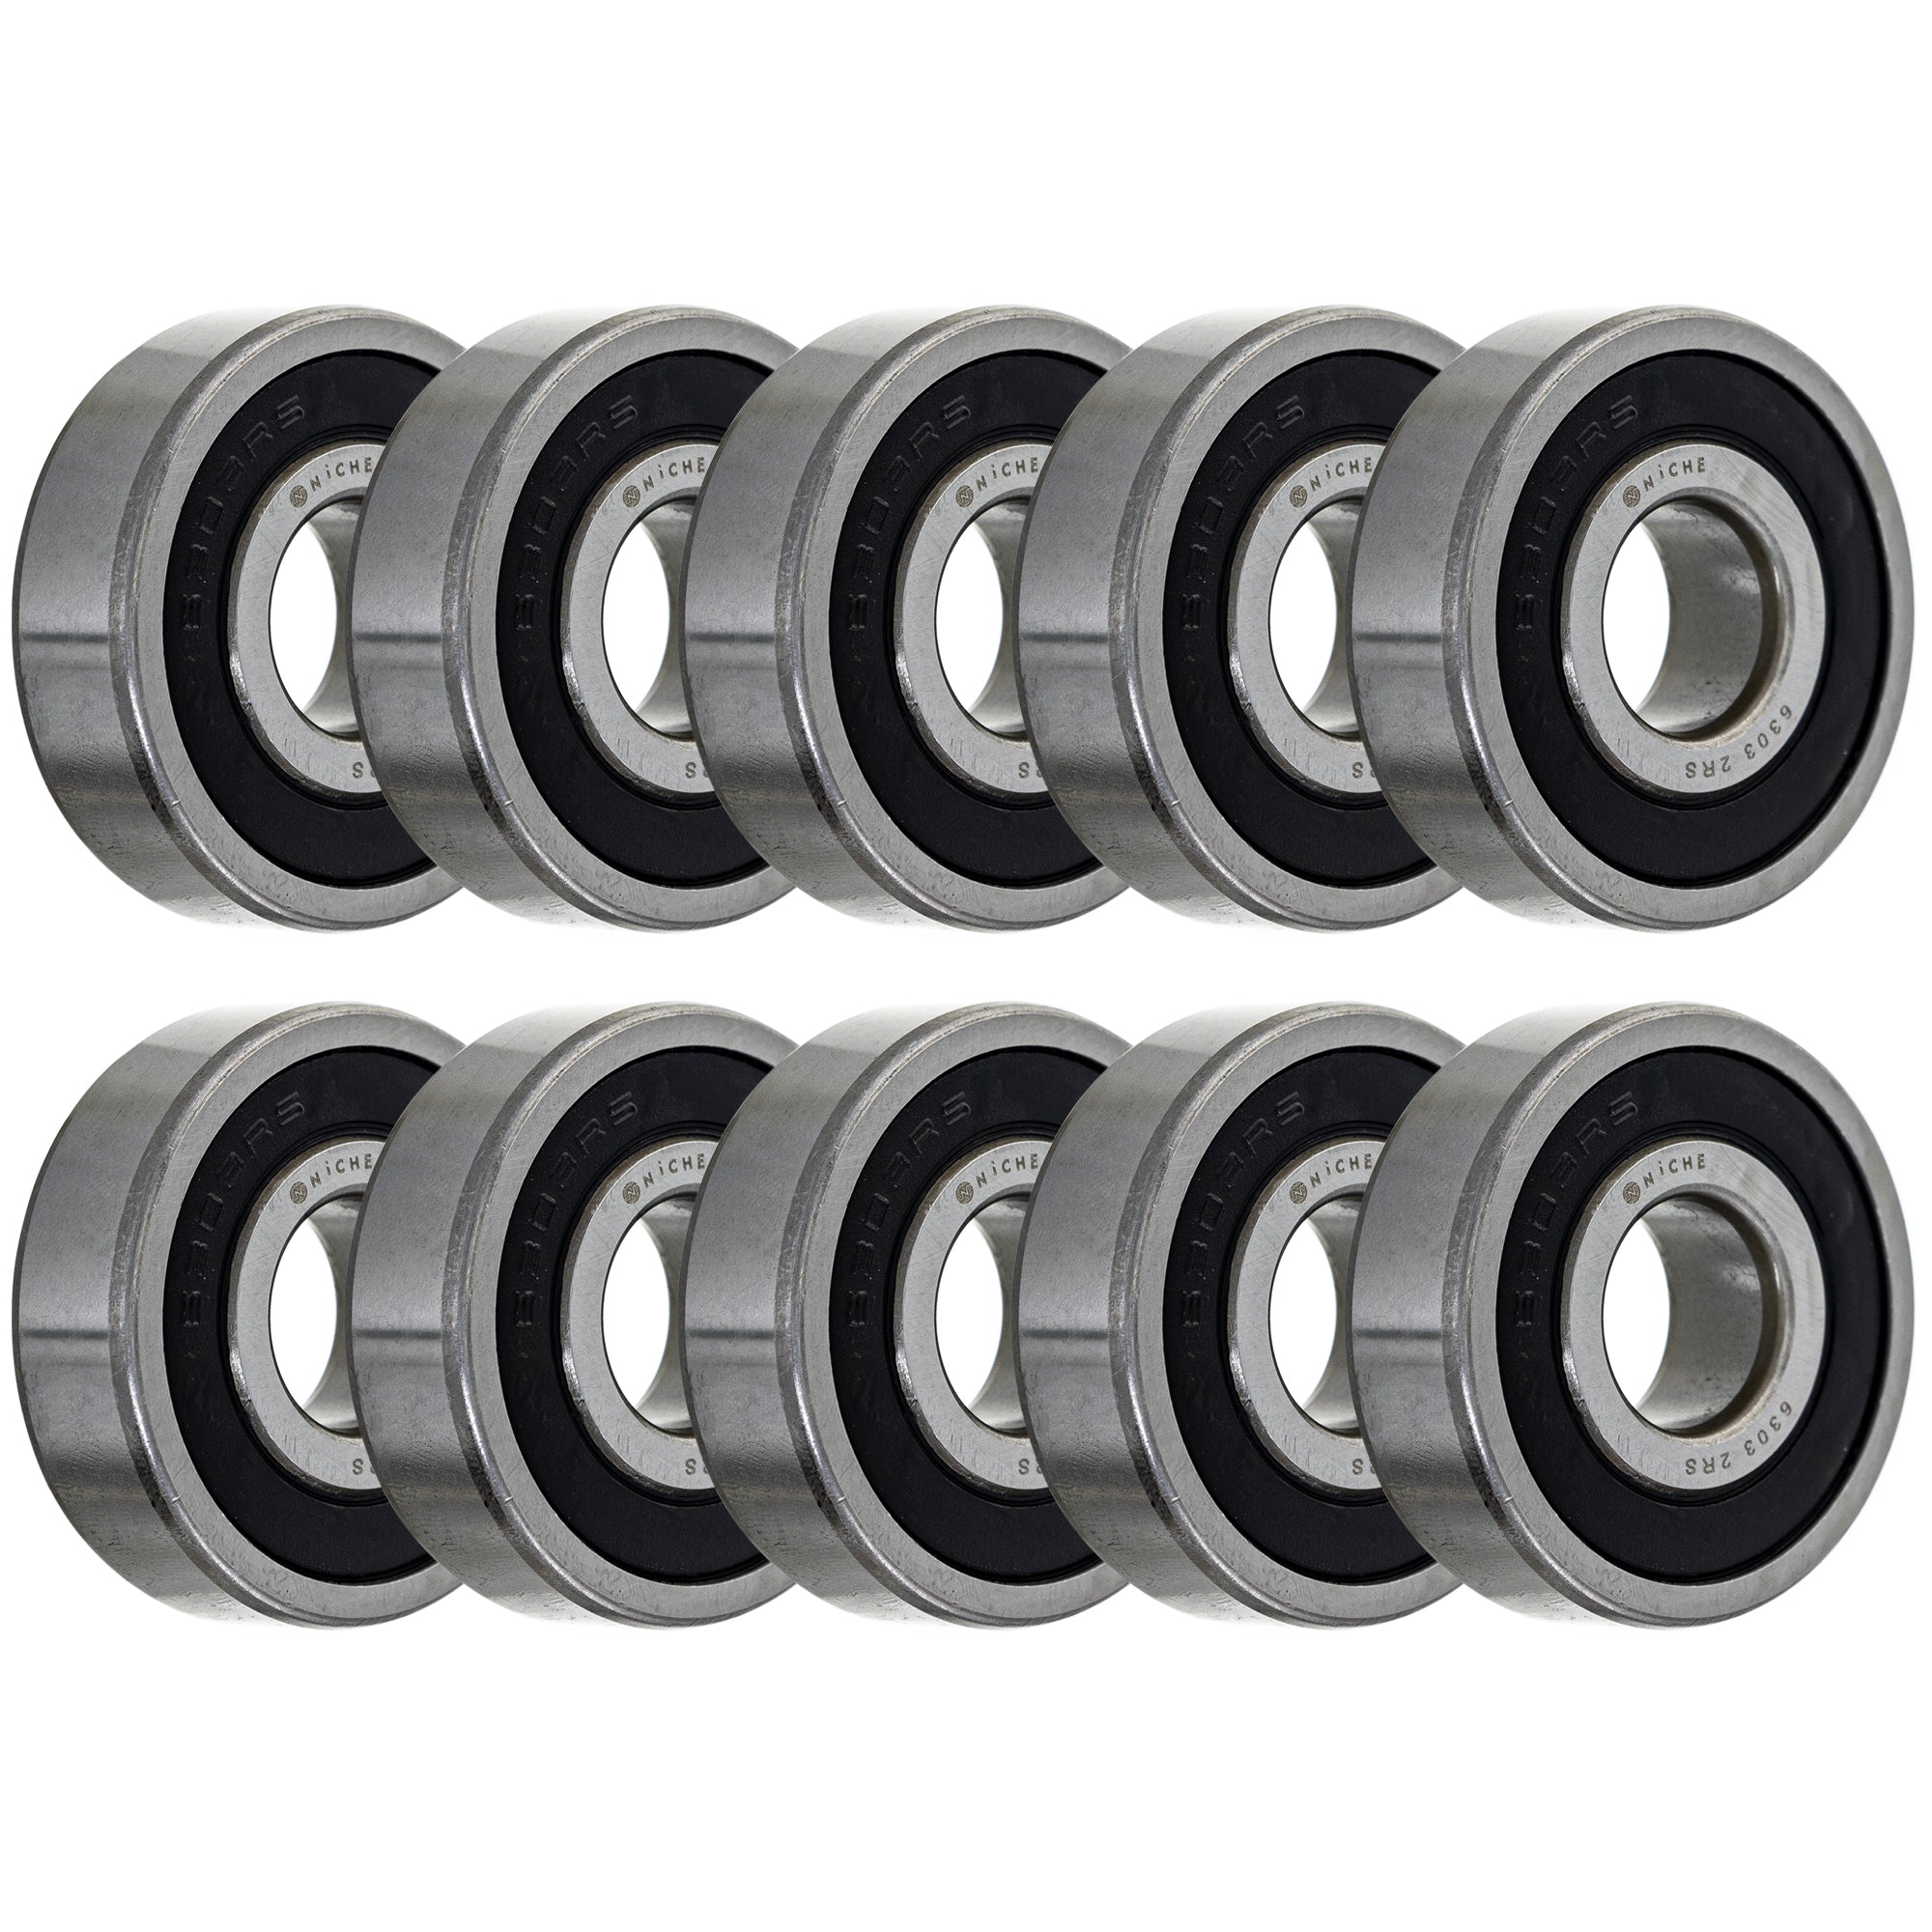 Single Row, Deep Groove, Ball Bearing Pack of 10 10-Pack for zOTHER V45 V30 Tourist Silver NICHE 519-CBB2236R